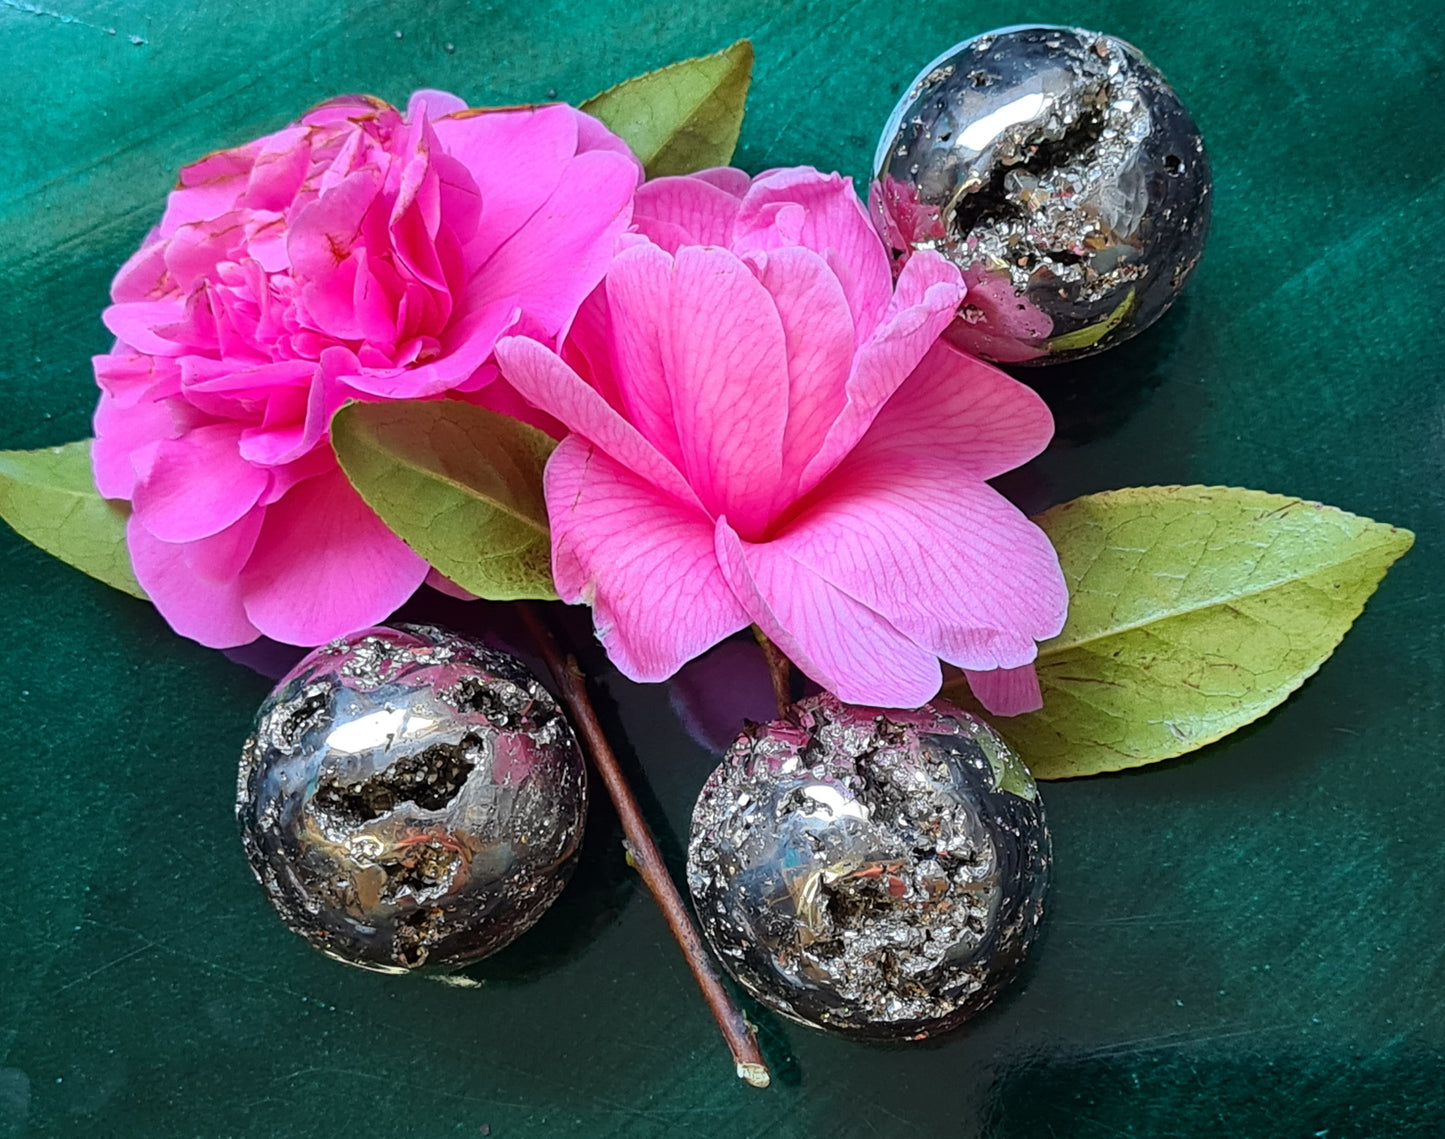 Three druzy Iron Pyrite Polished Spheres filled with caves shown with Pink Peonies on a green background